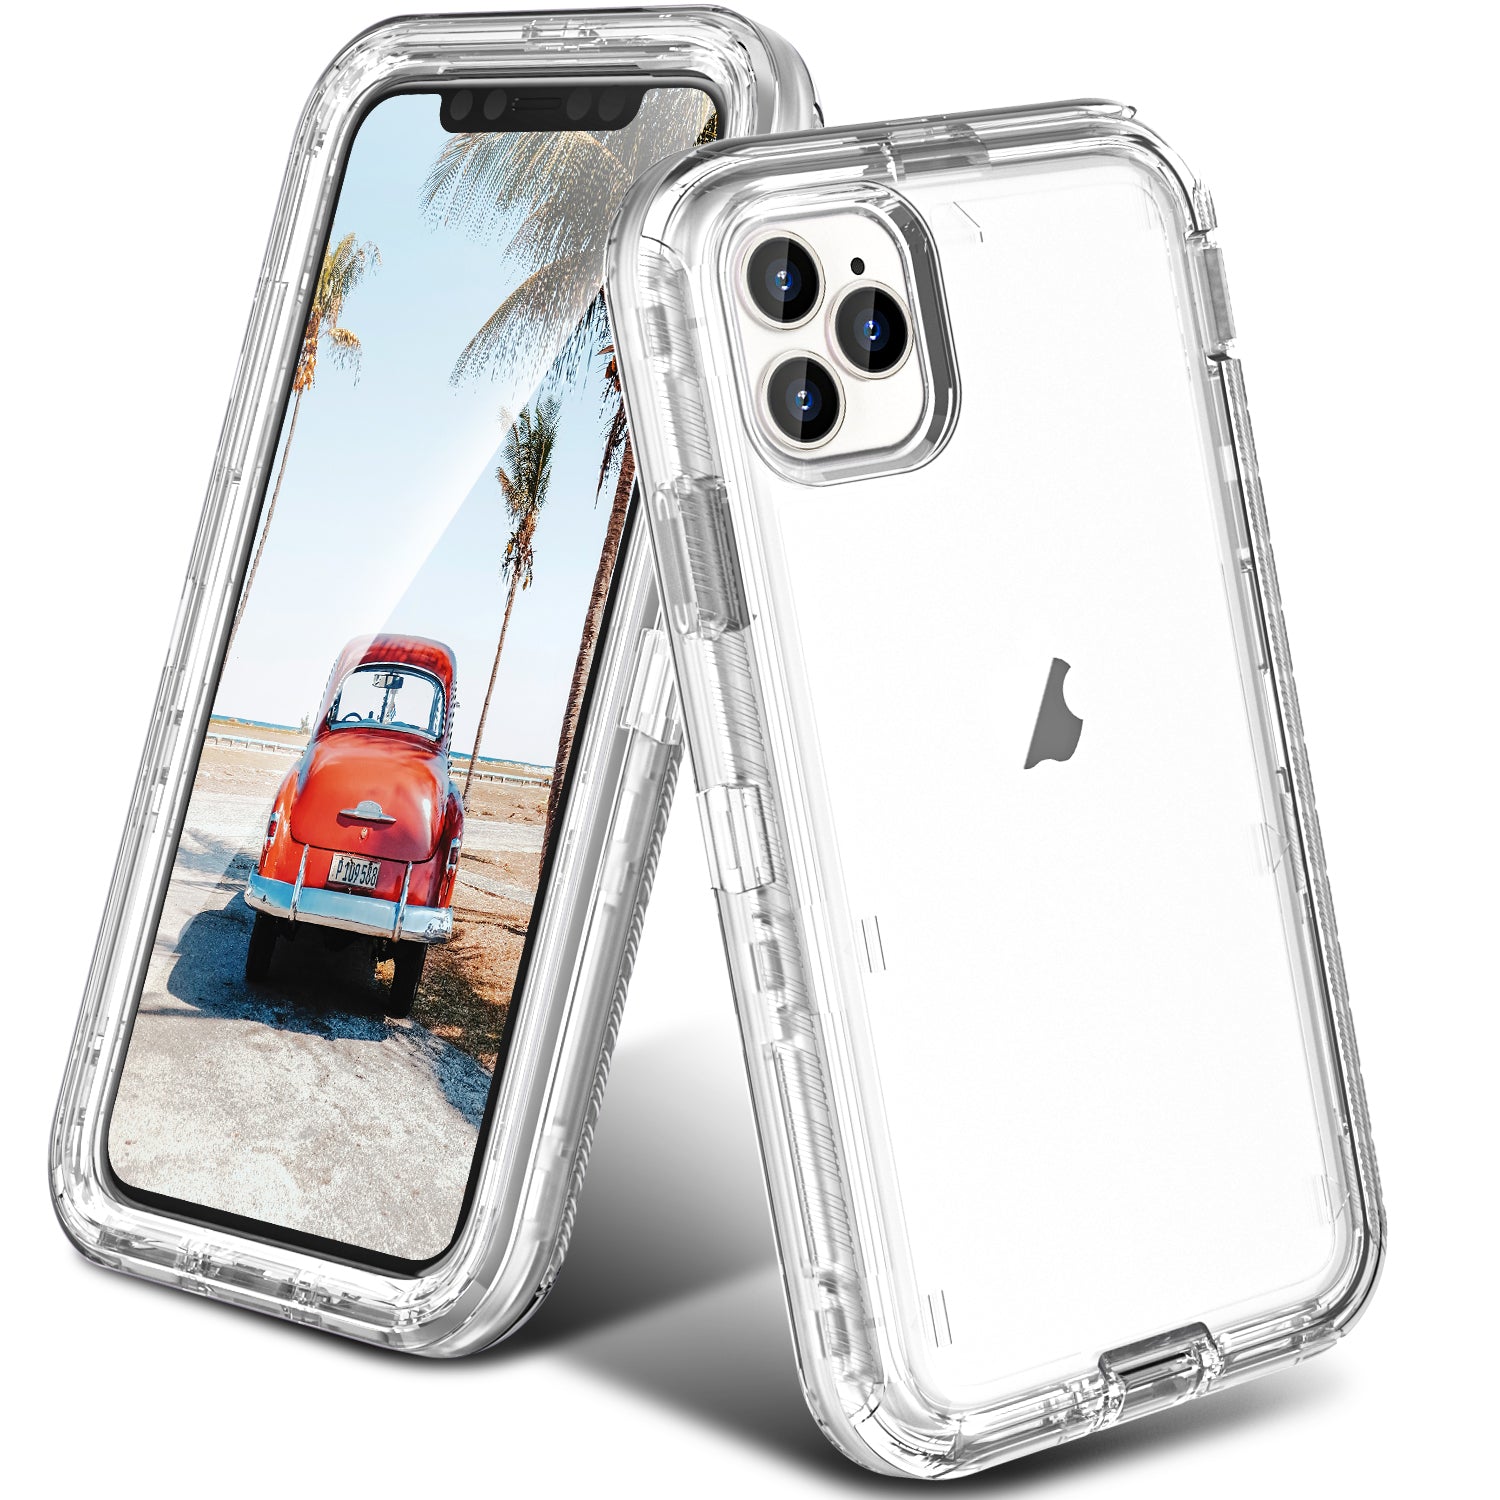 3X Military Grade Shockproof Slim Fit Hard PC Back and TPU Bumper Airbag Protective Case for iPhone 11 6.1 Inch-HD Humixx Crystal Clear Designed for iPhone 11 Case 15X Anti-Yellowing Navy Blue 